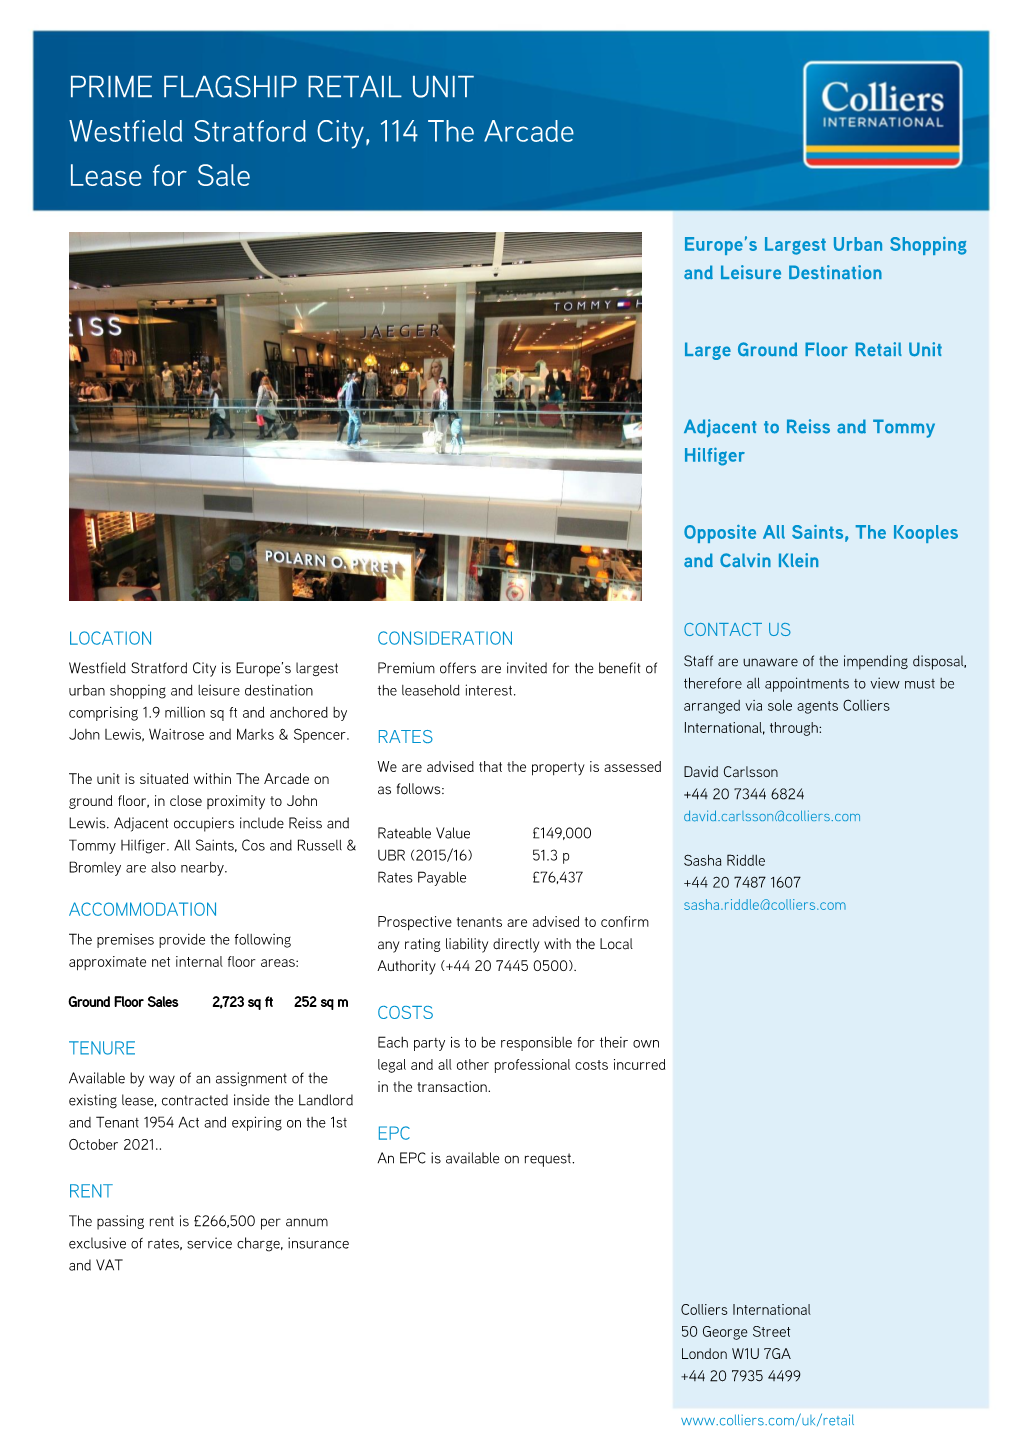 PRIME FLAGSHIP RETAIL UNIT Westfield Stratford City, 114 the Arcade Lease for Sale